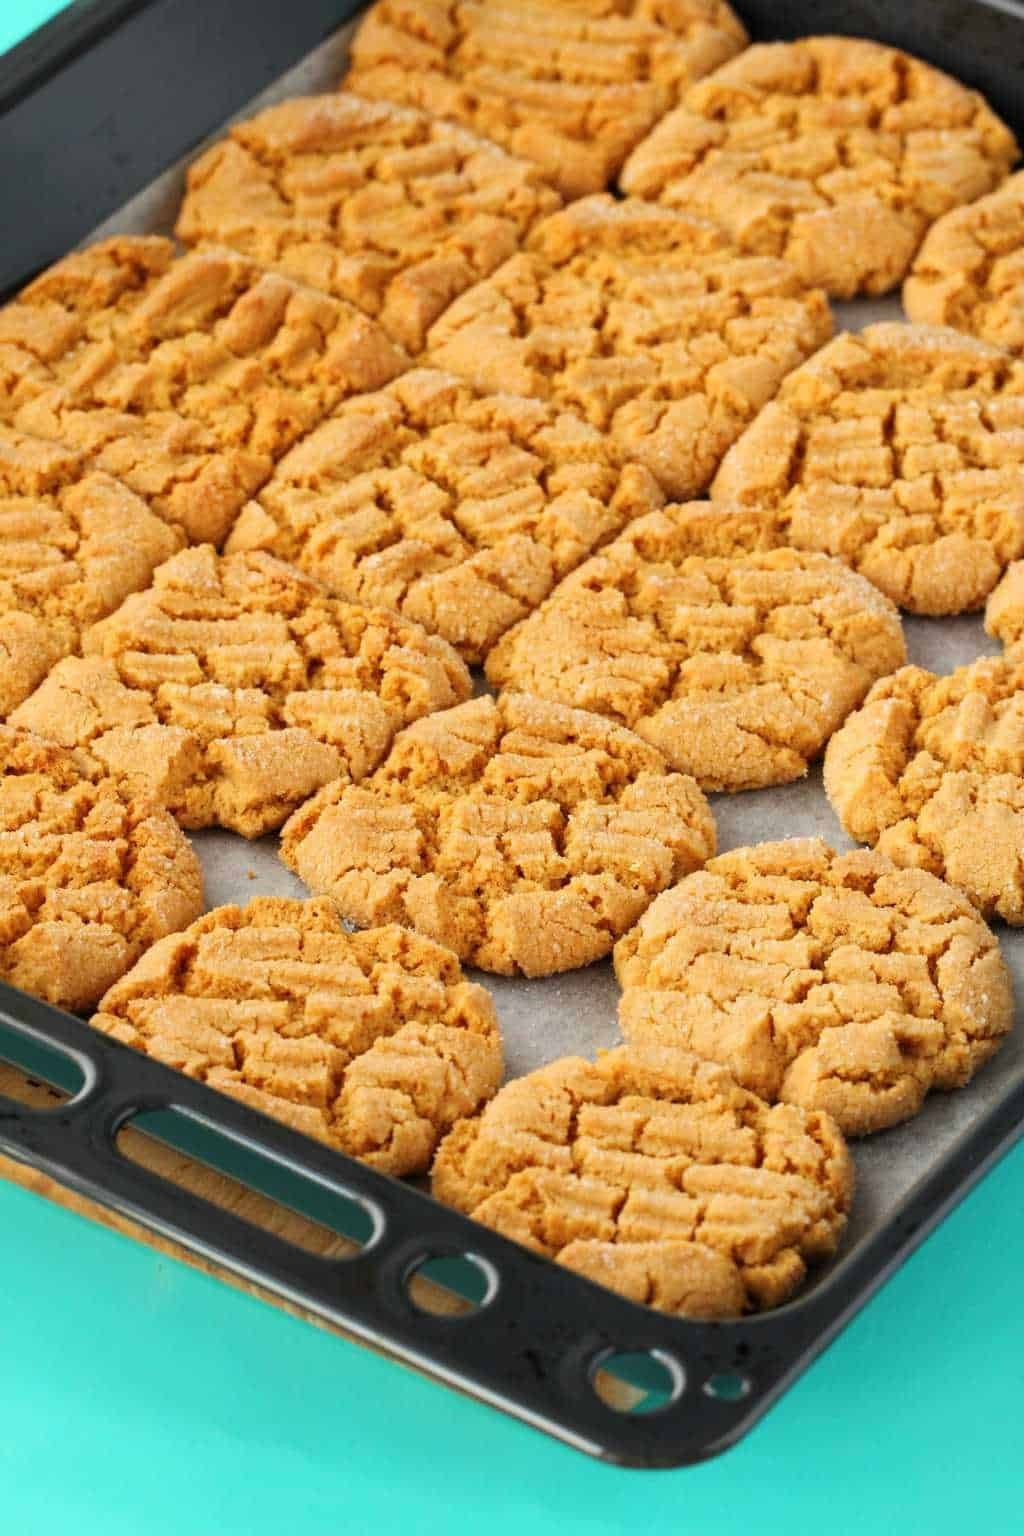 Easy Vegan Peanut Butter Cookies
 Quick and easy vegan peanut butter cookies that are